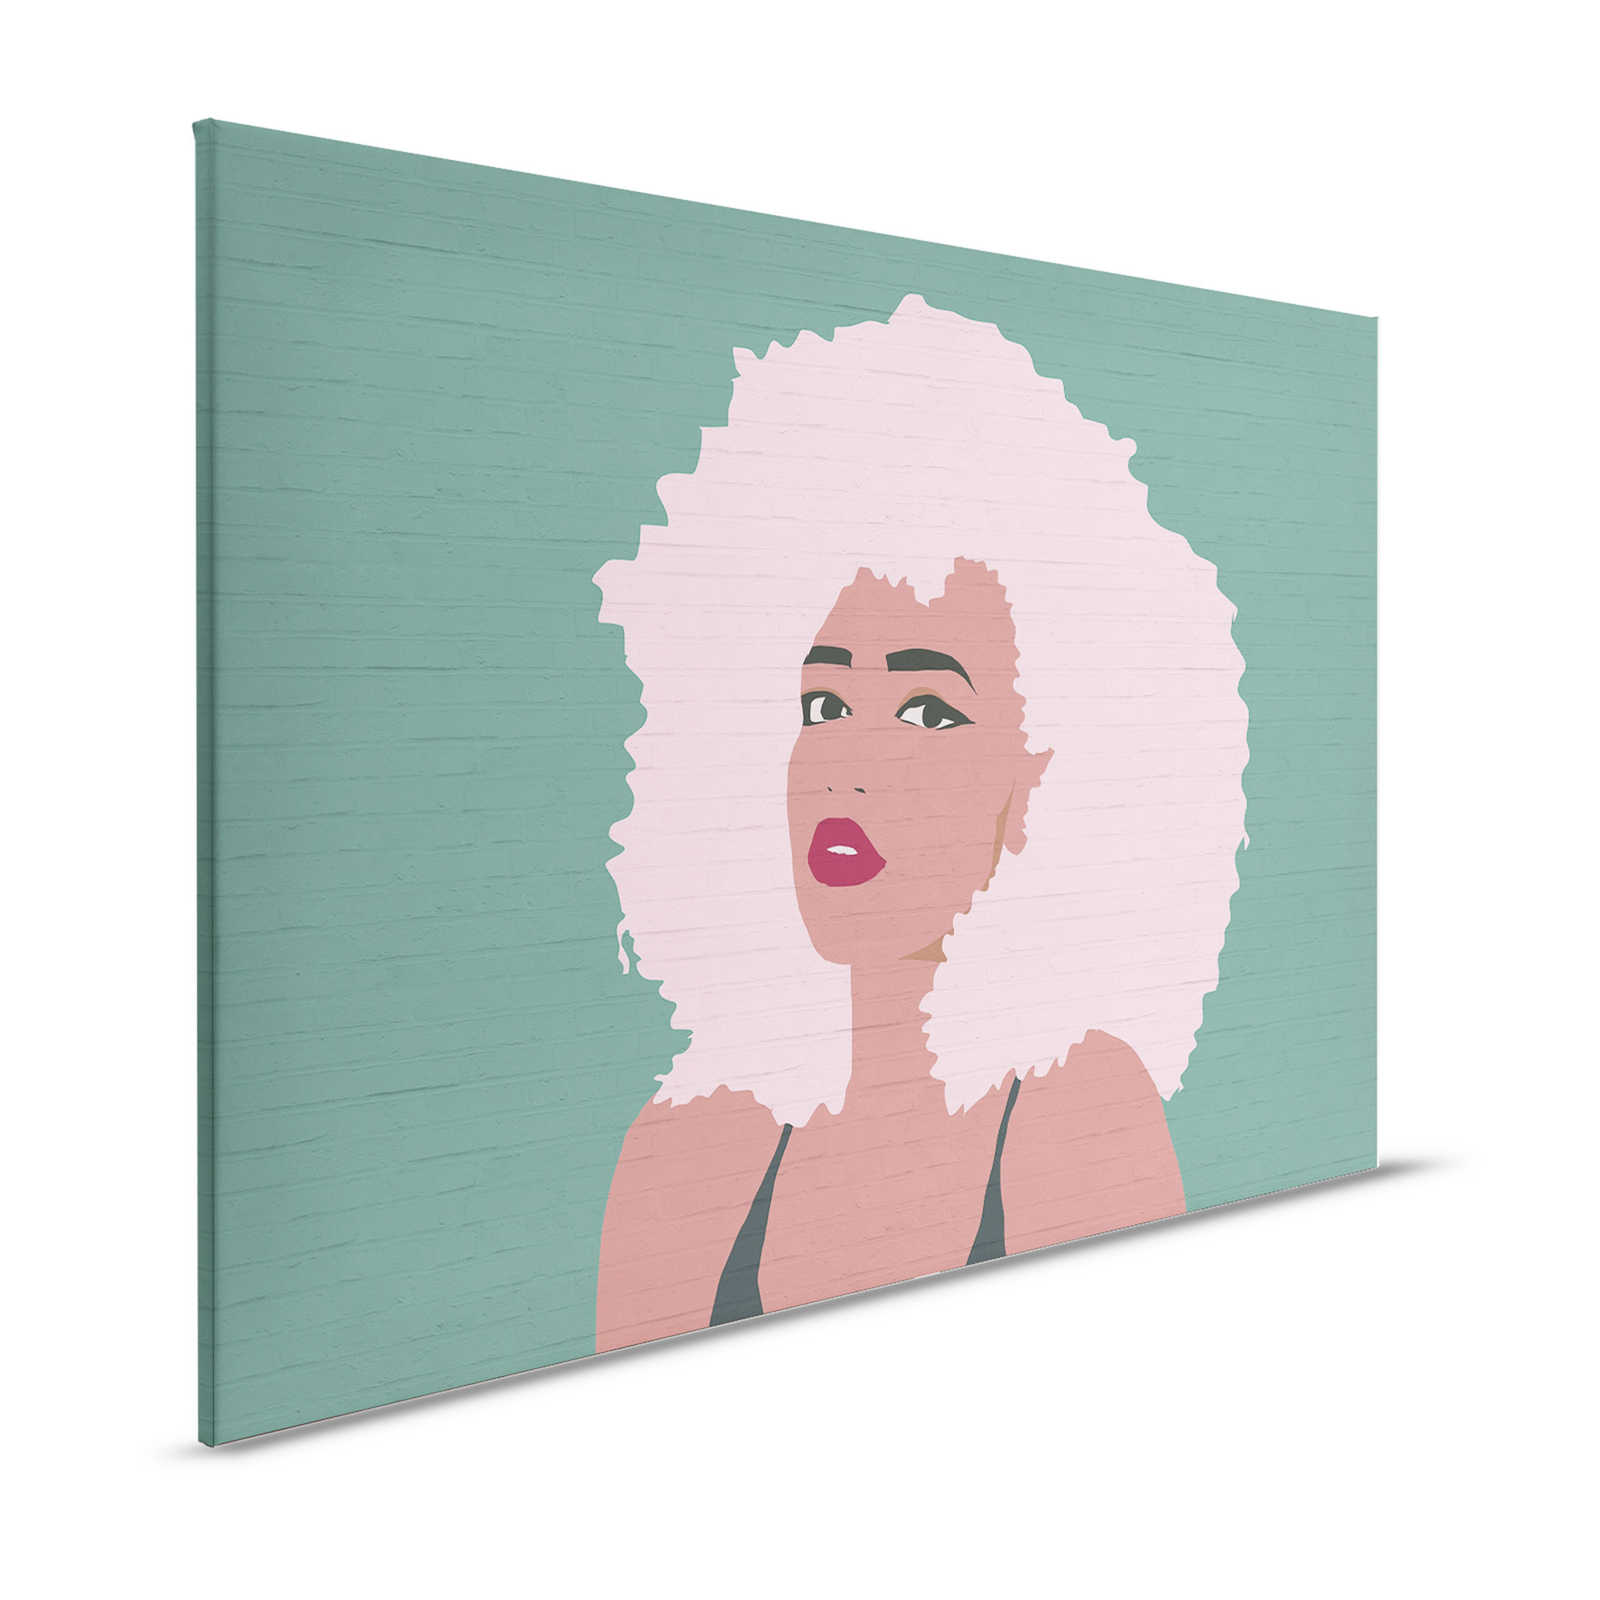 Women's Canvas Painting Whitney in Colour Block Style - 1.20 m x 0.80 m
